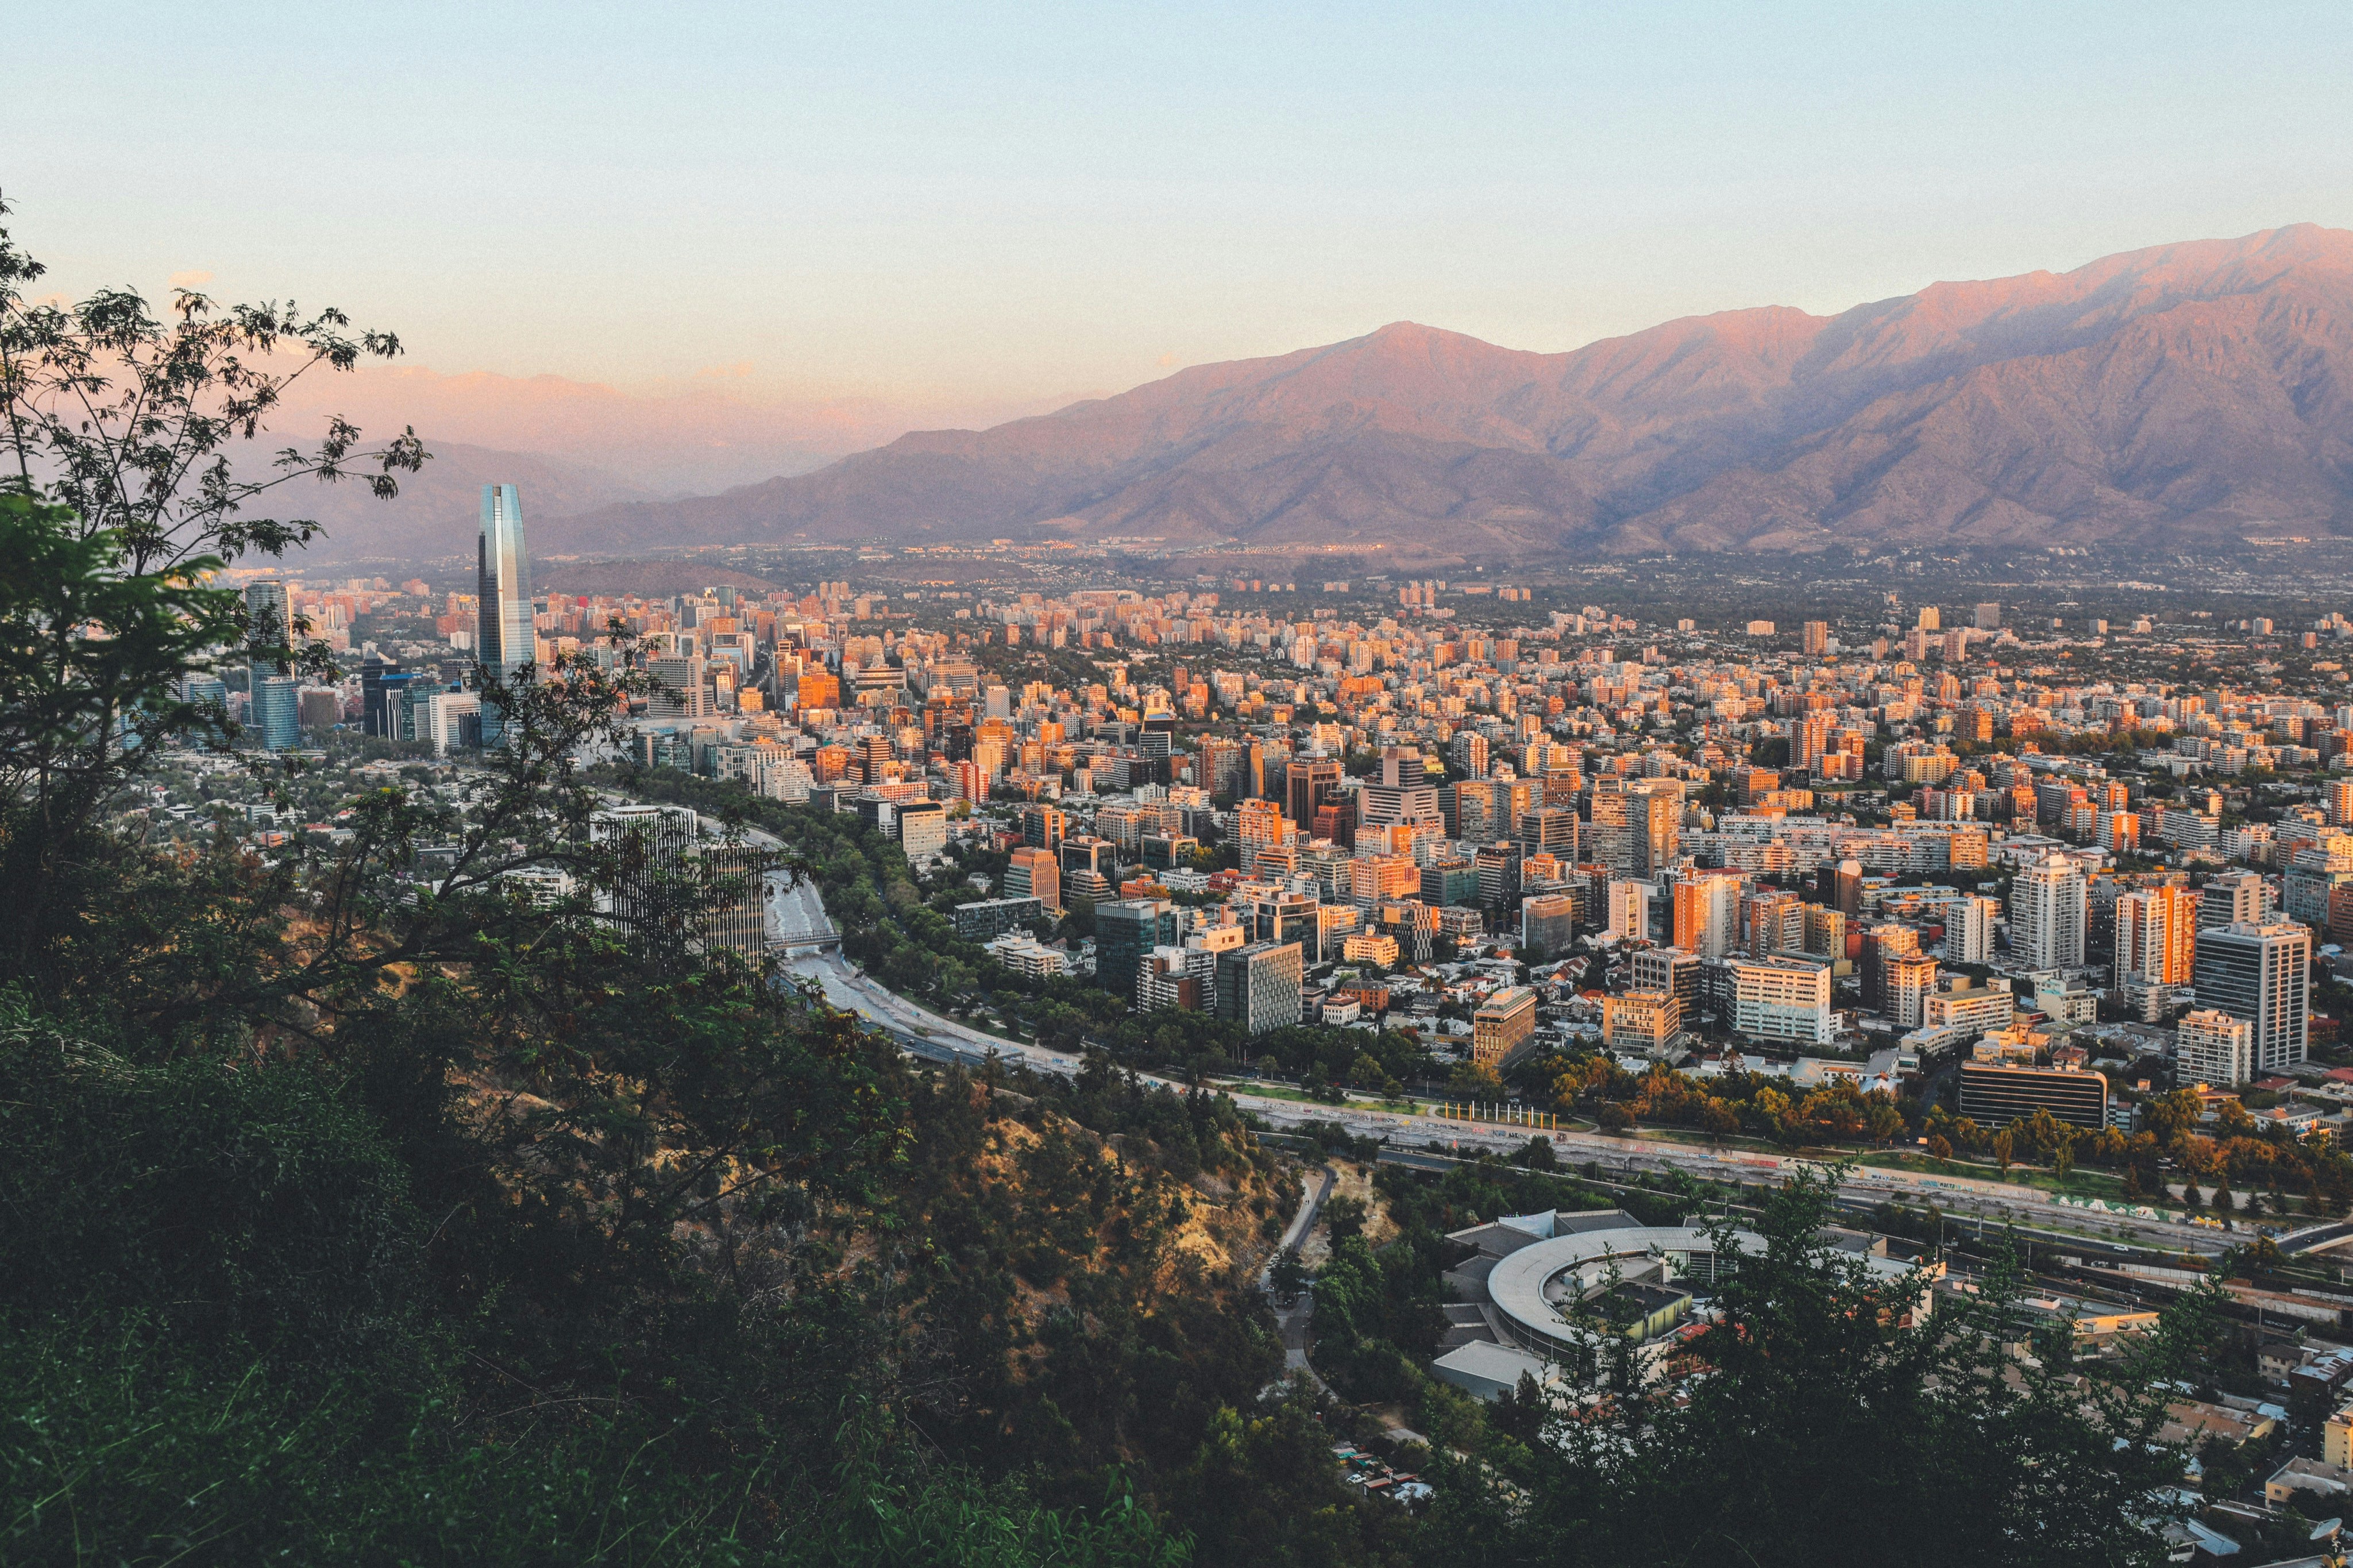 A landscape picture of Santiago with early-morning light